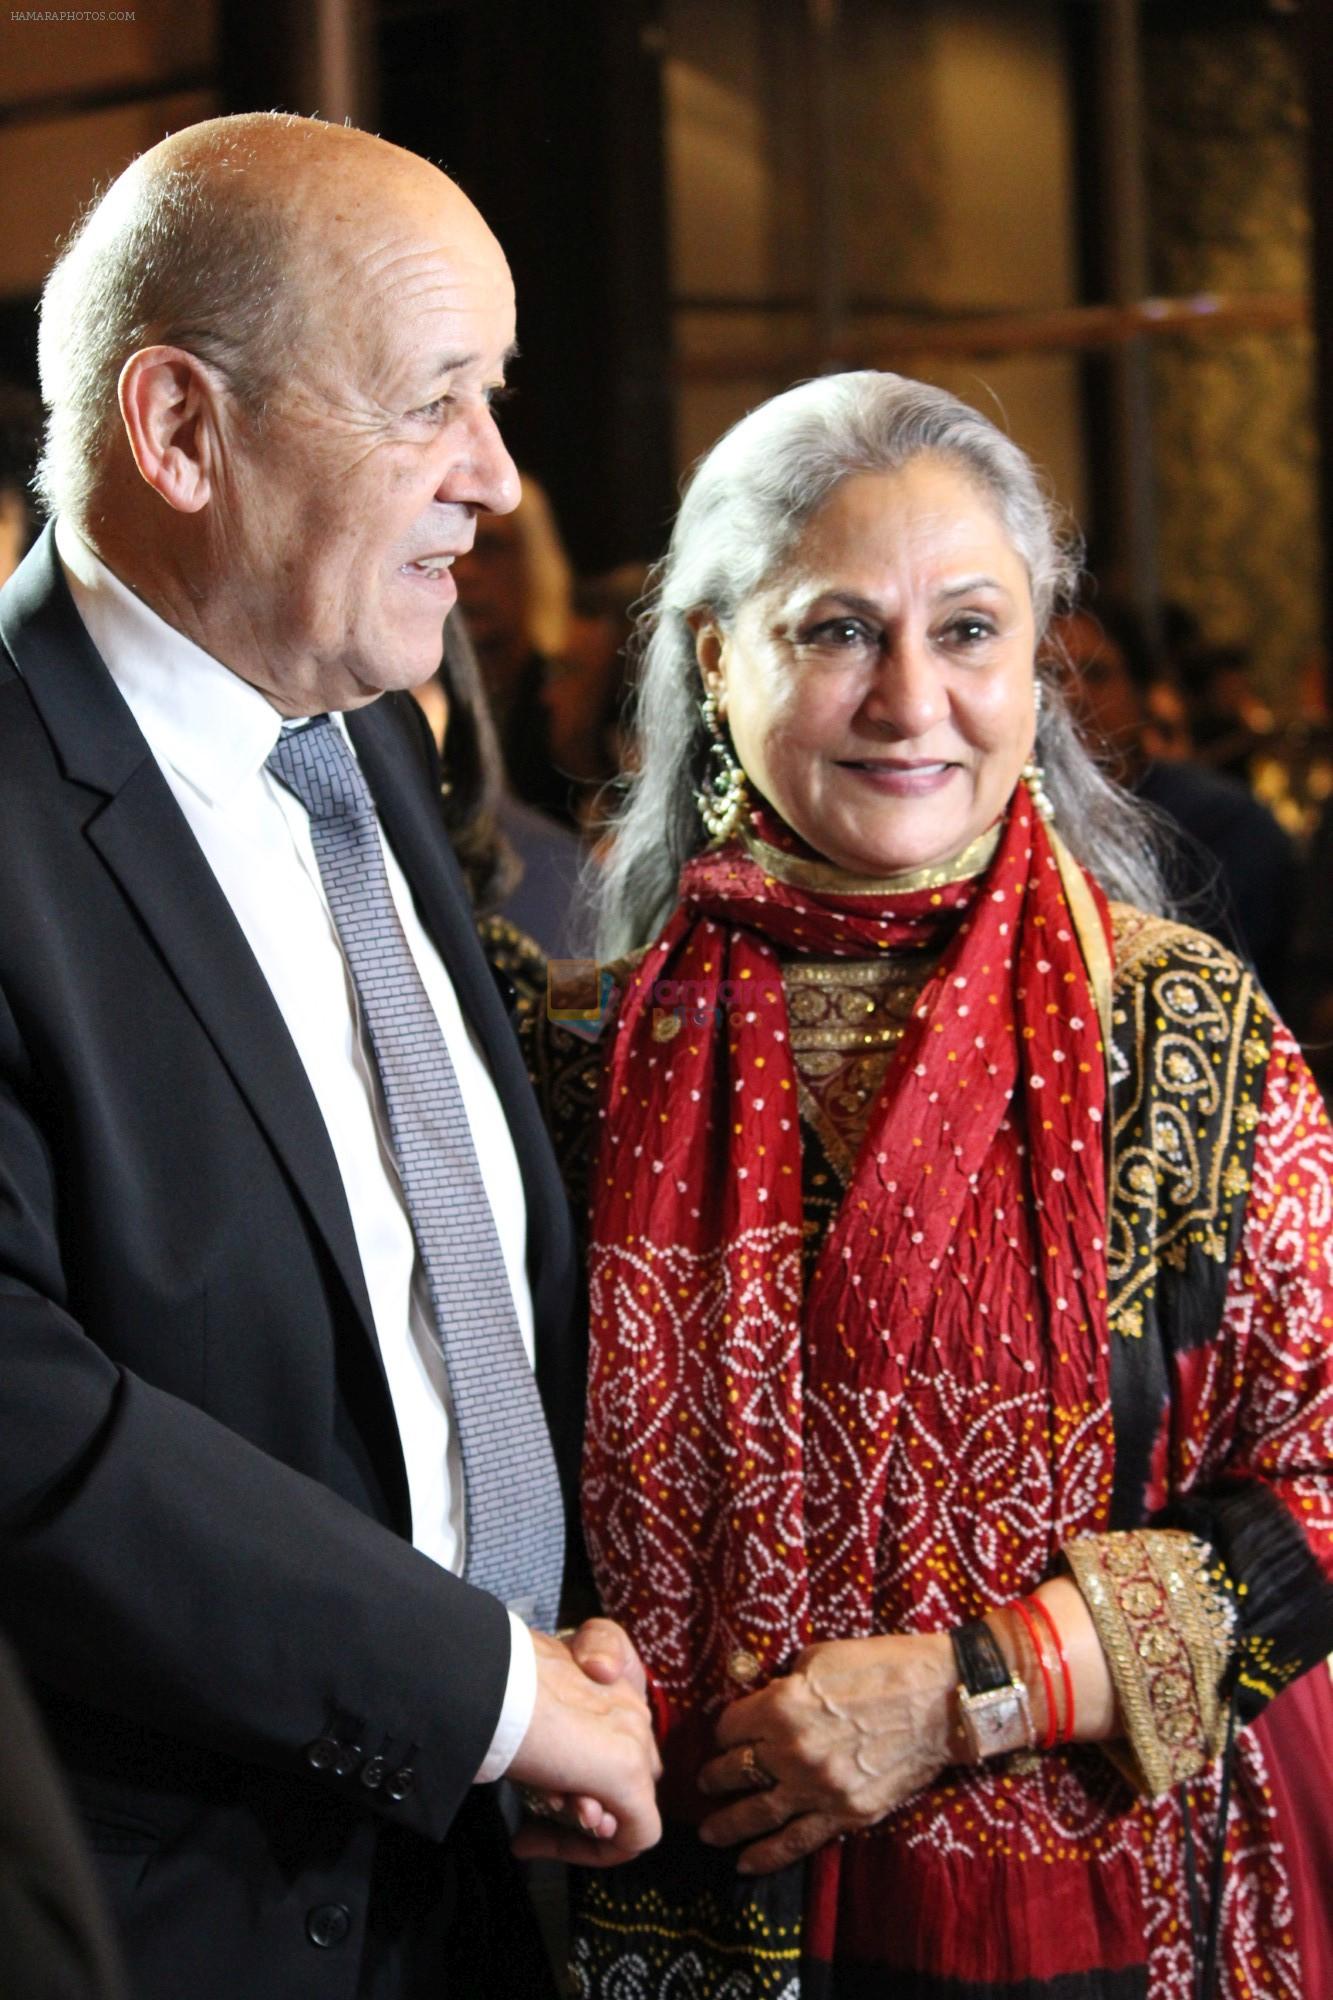 Jaya Bachchan at 2nd Indo-French Meeting Wherin film Industry Culture Exchange Between India on 15th Dec 2018